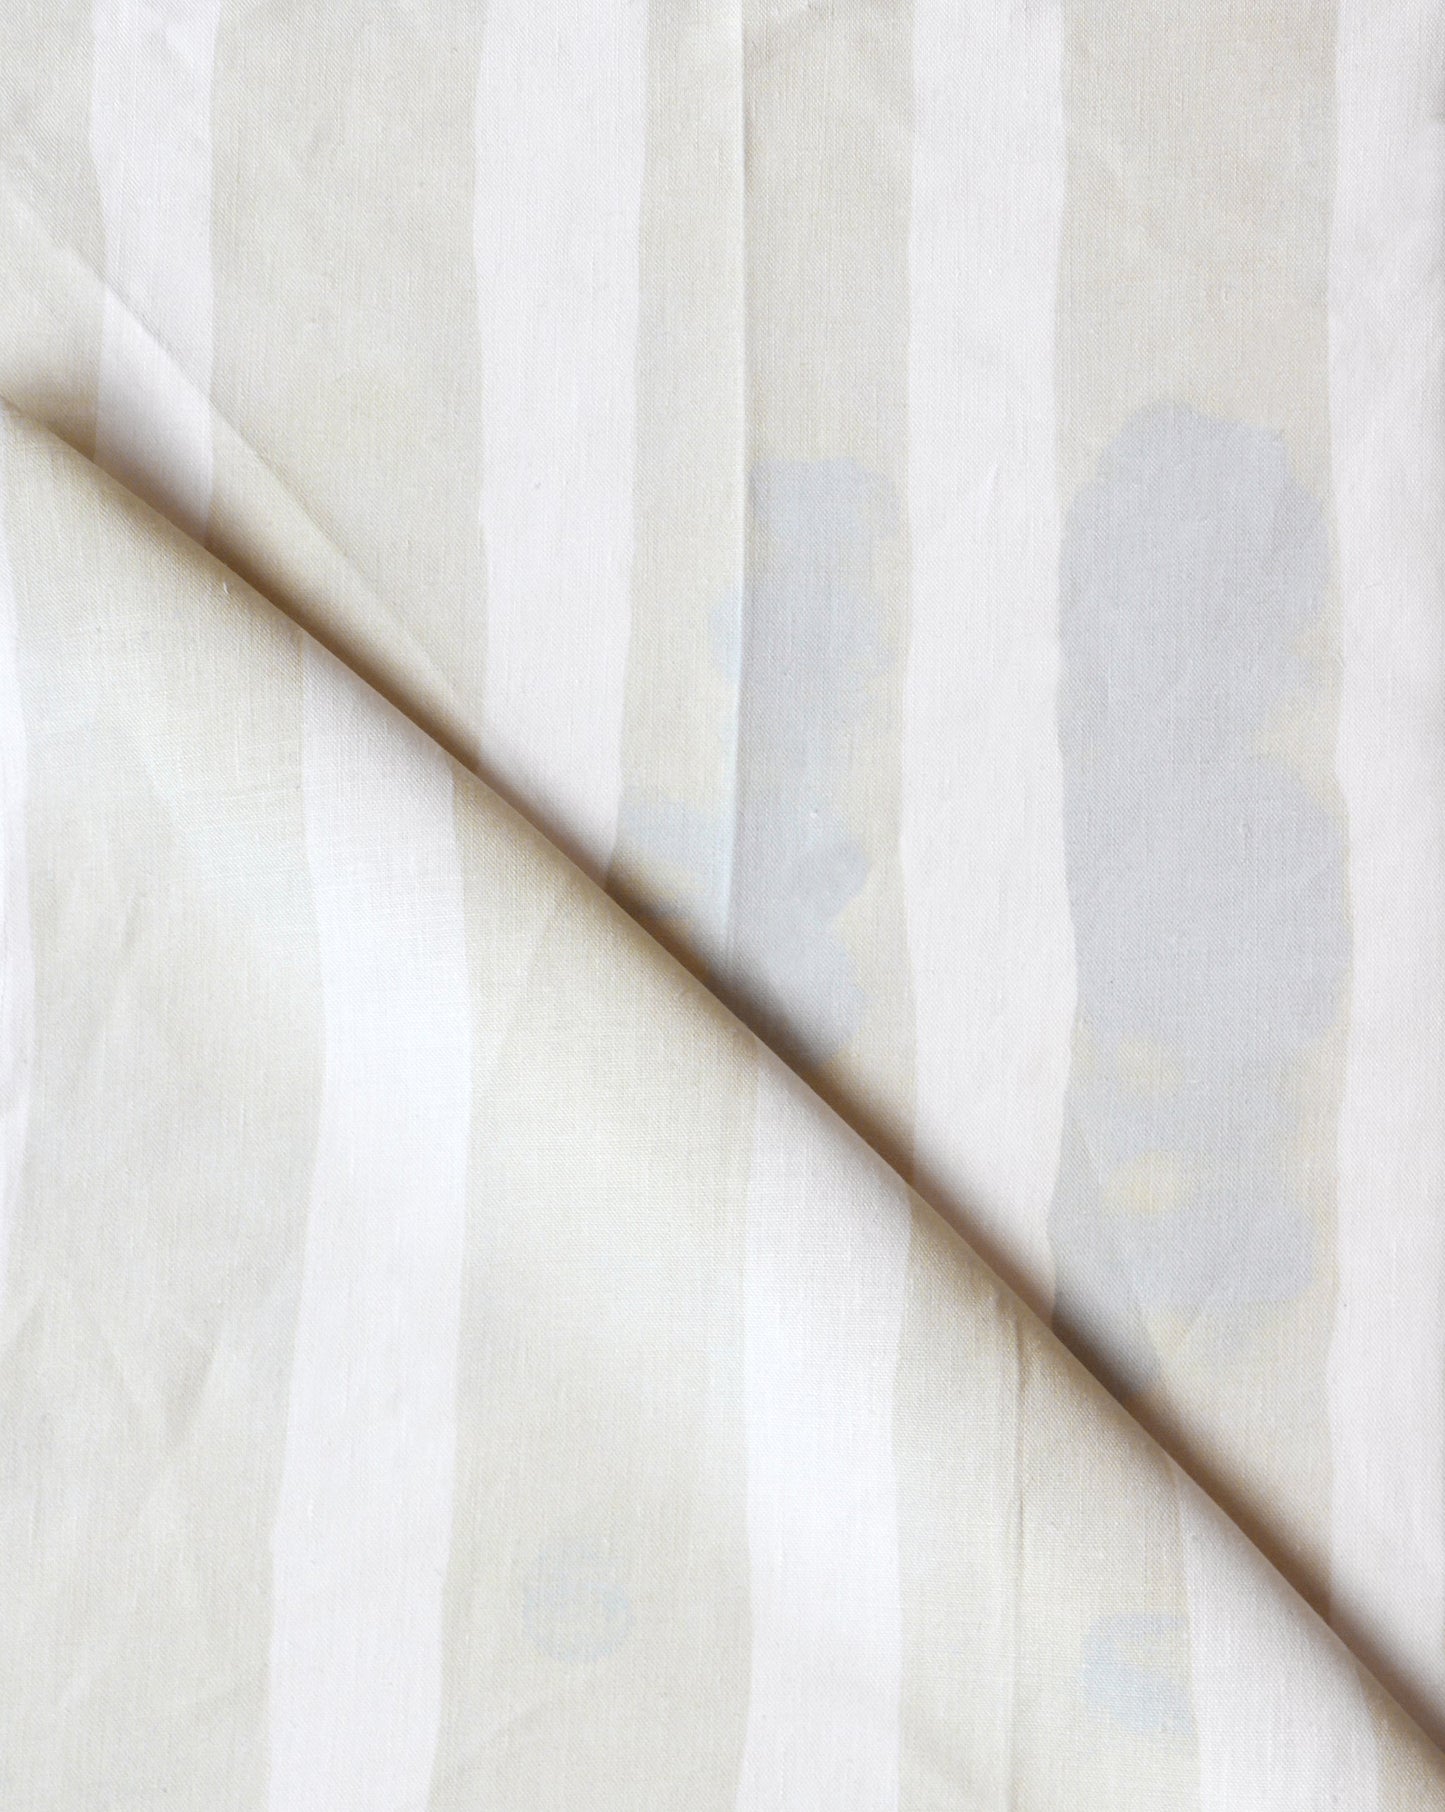 A close up of the Bold Stripe Fabric||Sand from the Eskayel Stripes Collection.